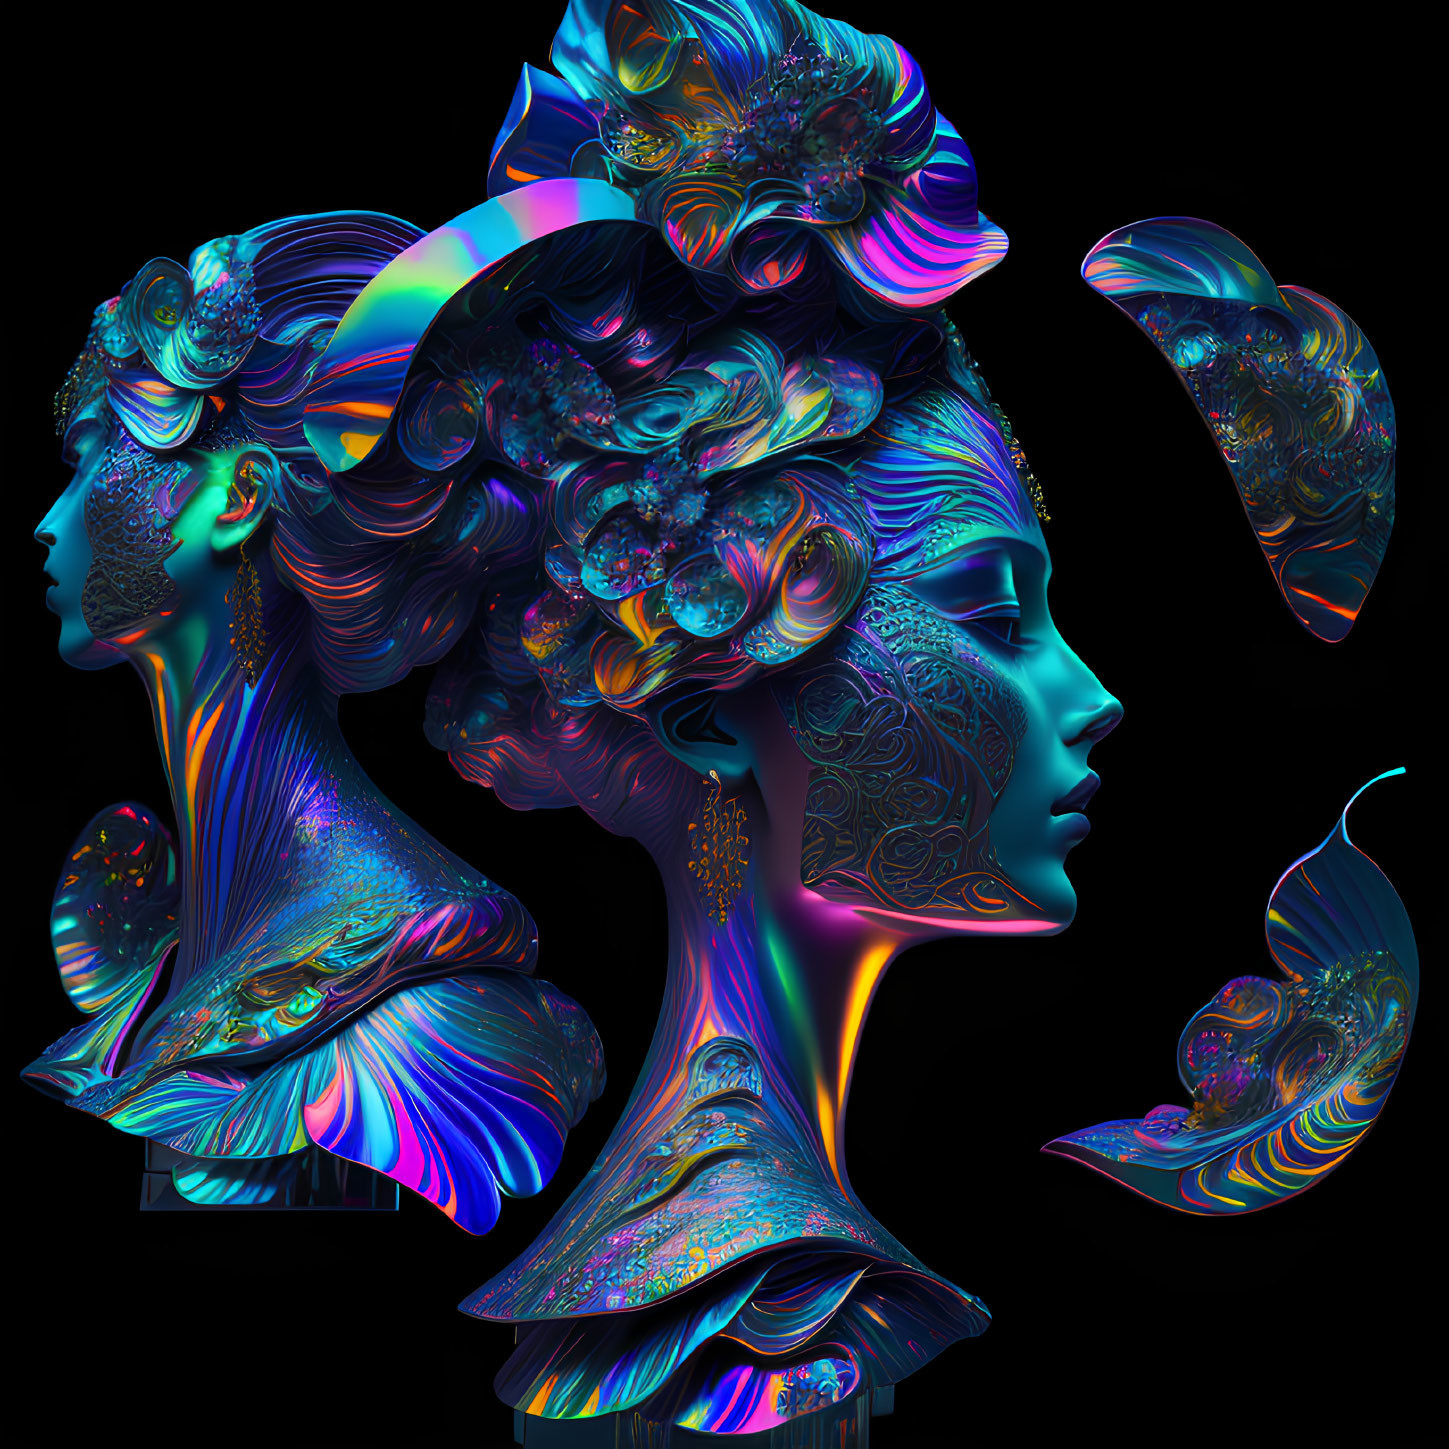 Digital Art: Three Profile Views of Woman with Iridescent Patterns and Butterflies